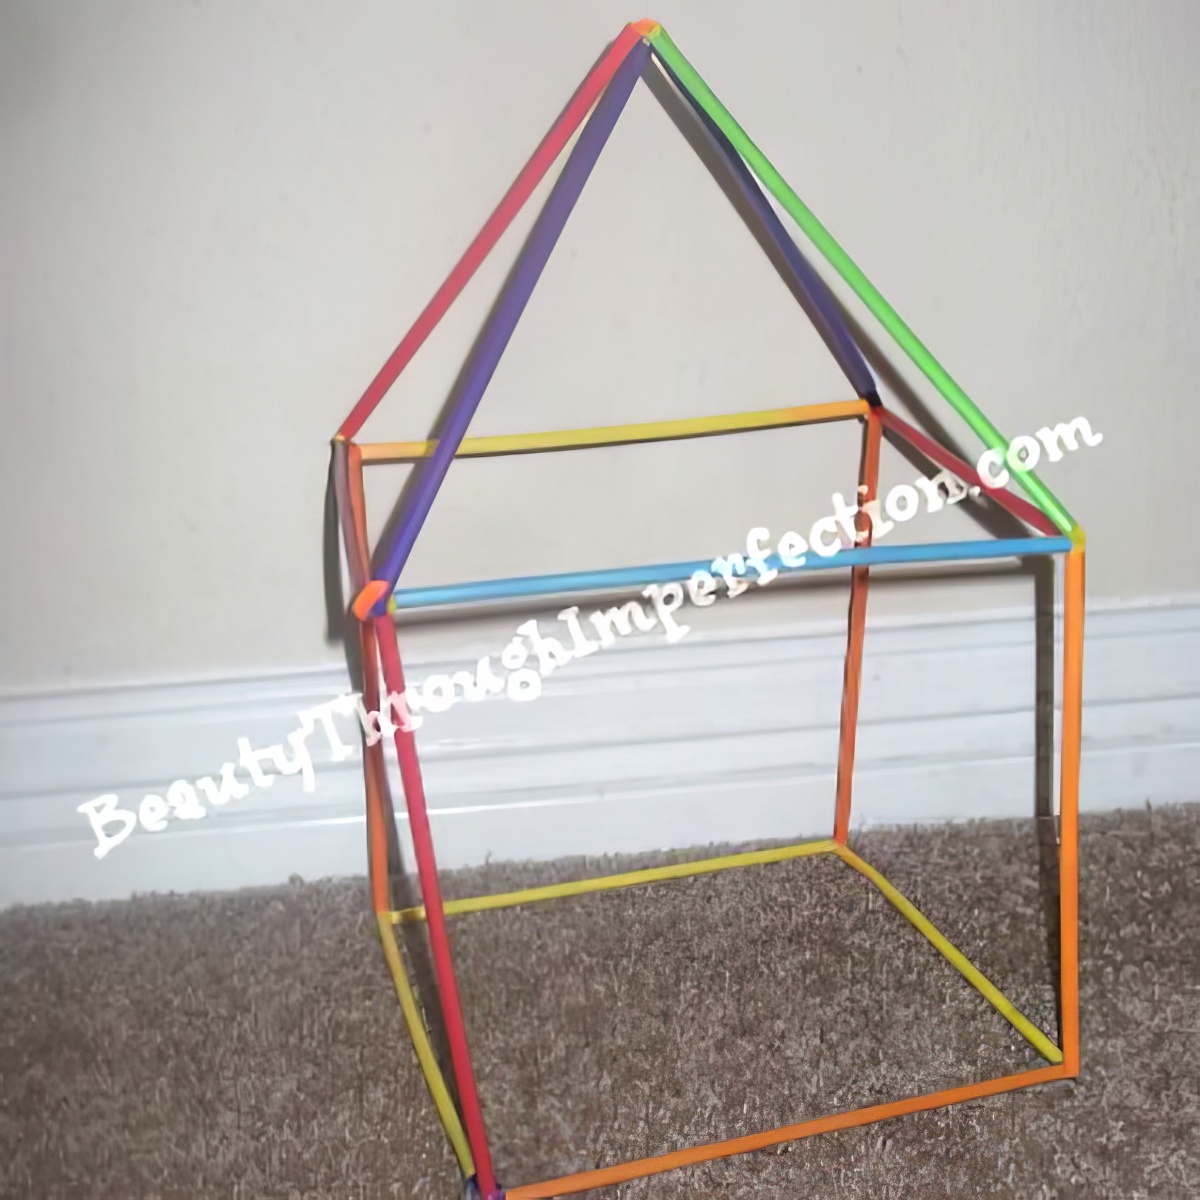 Straws and pipe cleaners, learning activities for 2-year-olds, build your own house